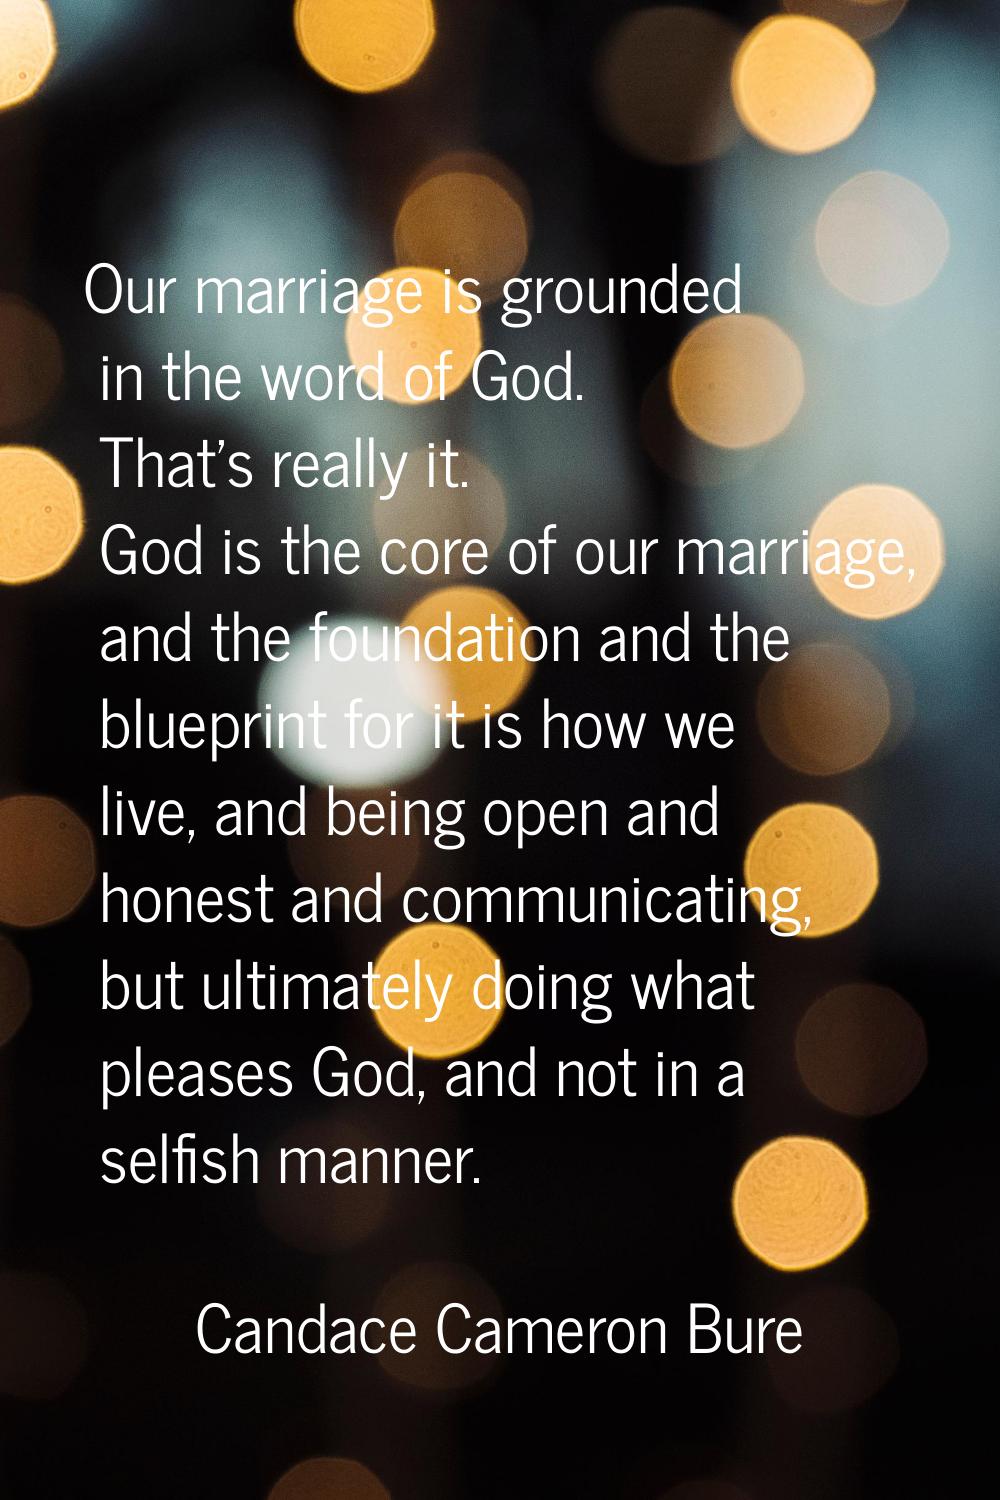 Our marriage is grounded in the word of God. That's really it. God is the core of our marriage, and